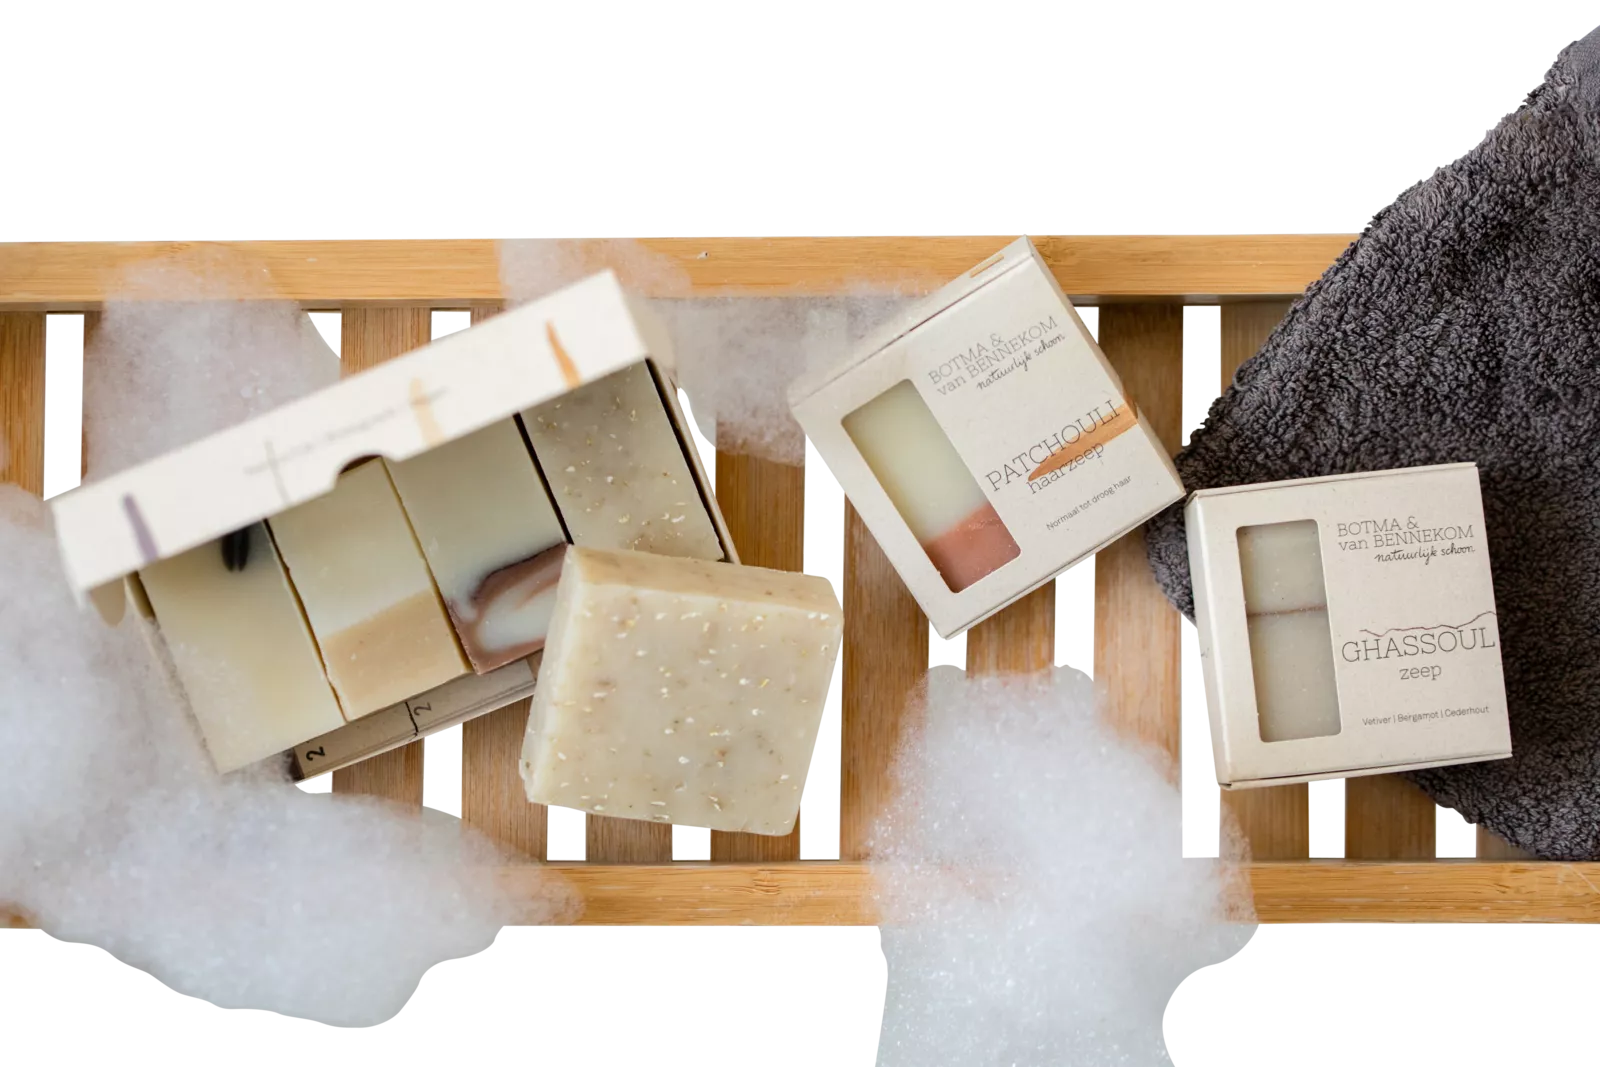 PaperWise eco friendly paper sustainablesoap bar box packaging BotmaenvanBennekom5c